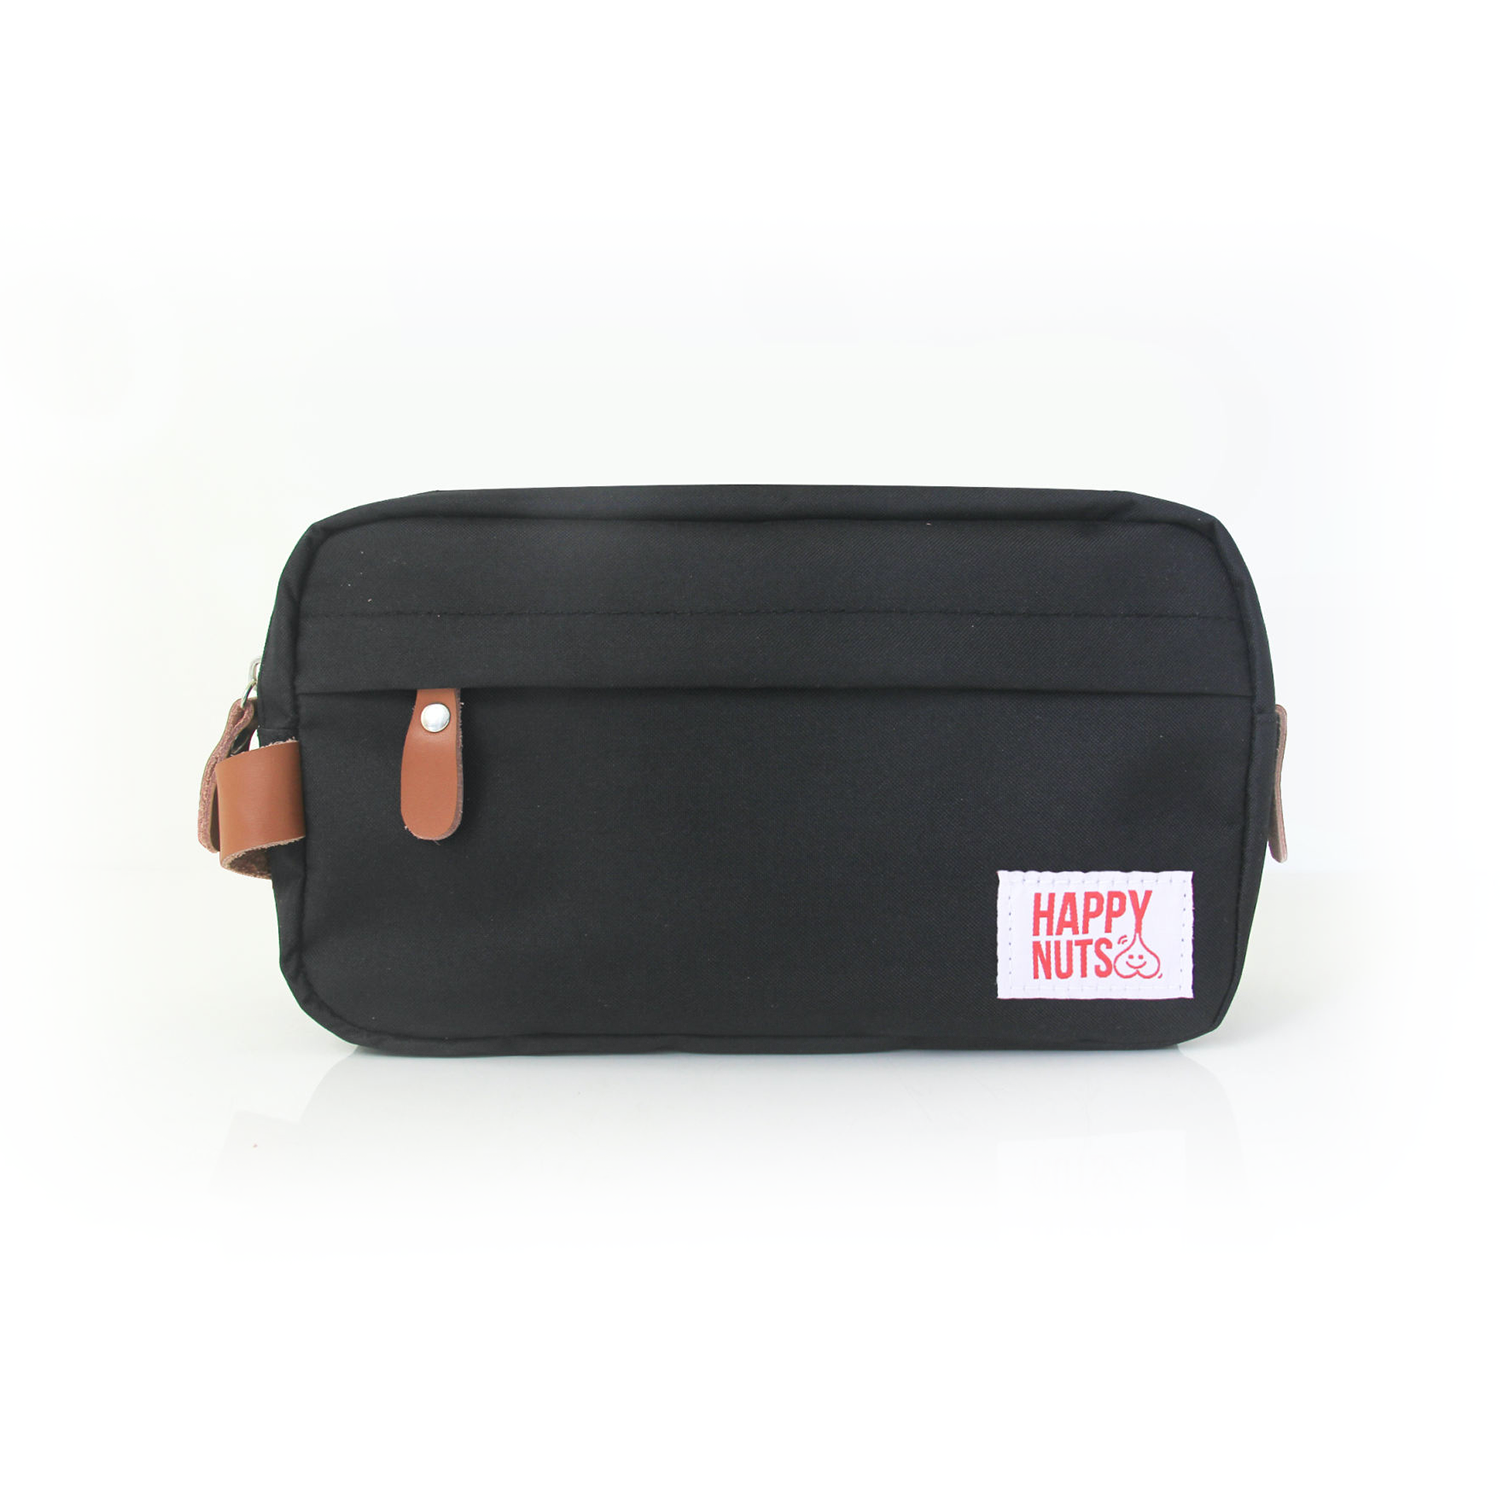 The Nut Sack Toiletry Bag